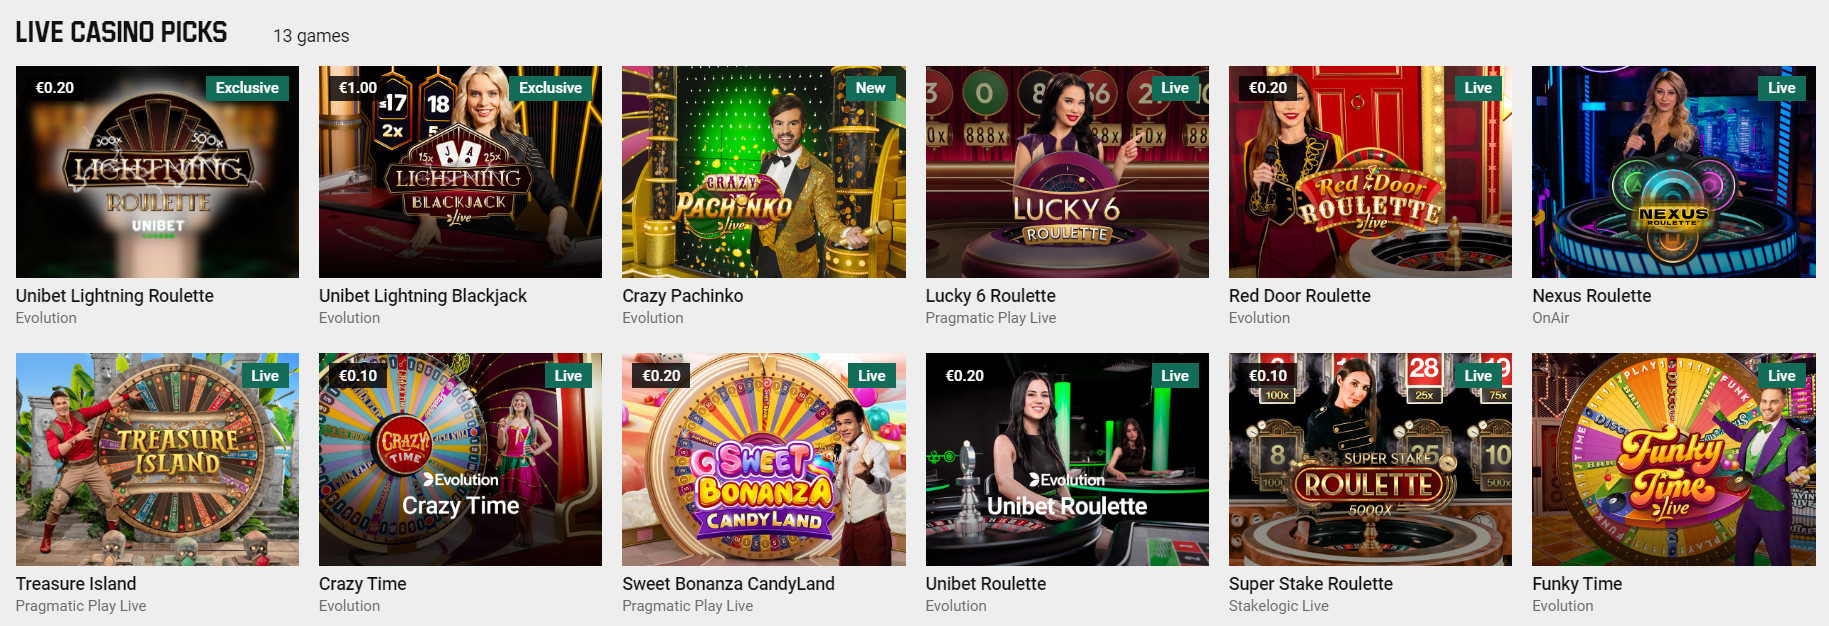 Live Games Section at Unibet Casino